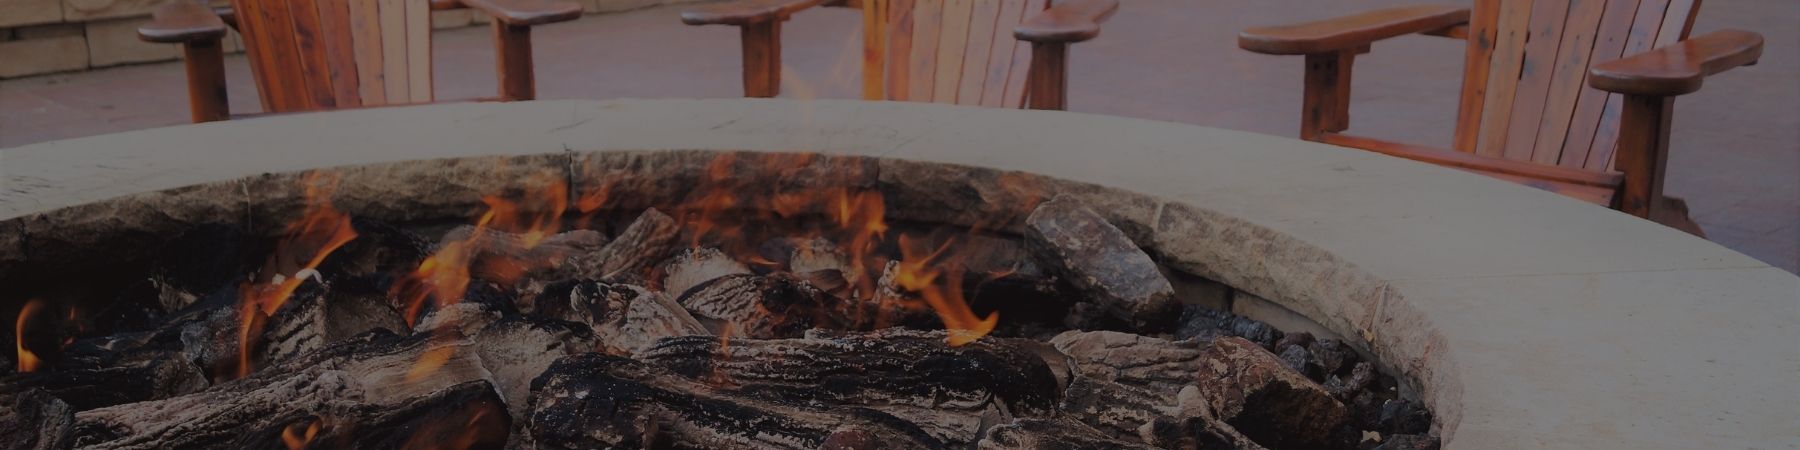 Open Air Burning Halton Hills, Are Propane Fire Pits Legal In Ontario